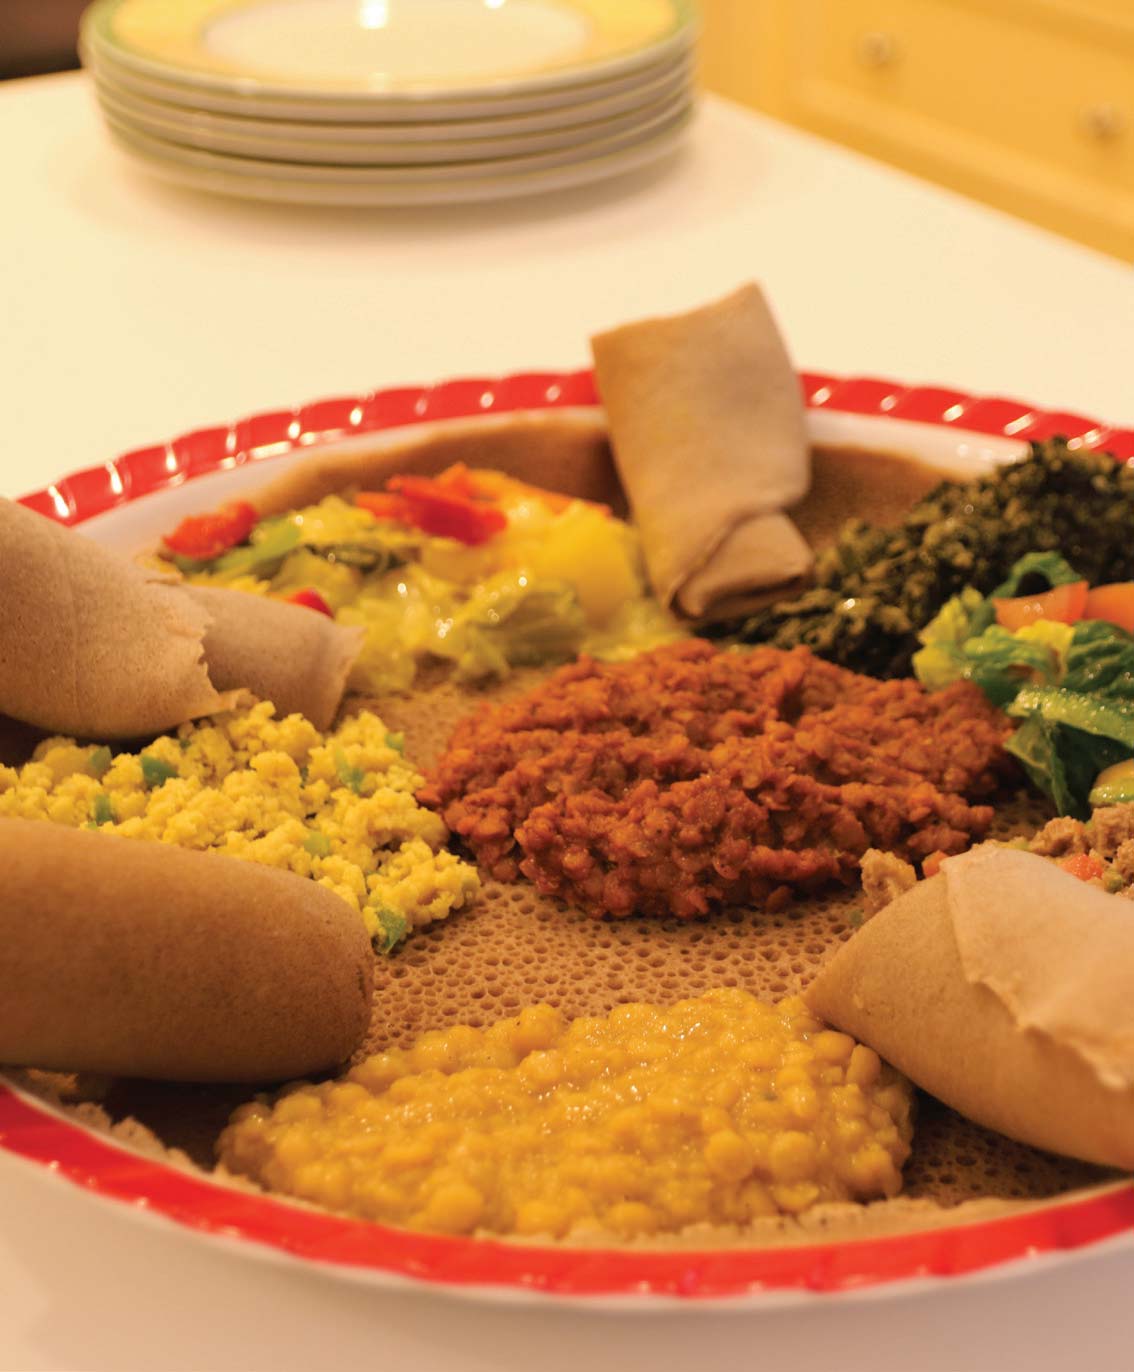 A traditional plating of injera with various vegetarian dishes prepared by Woldemedhin.